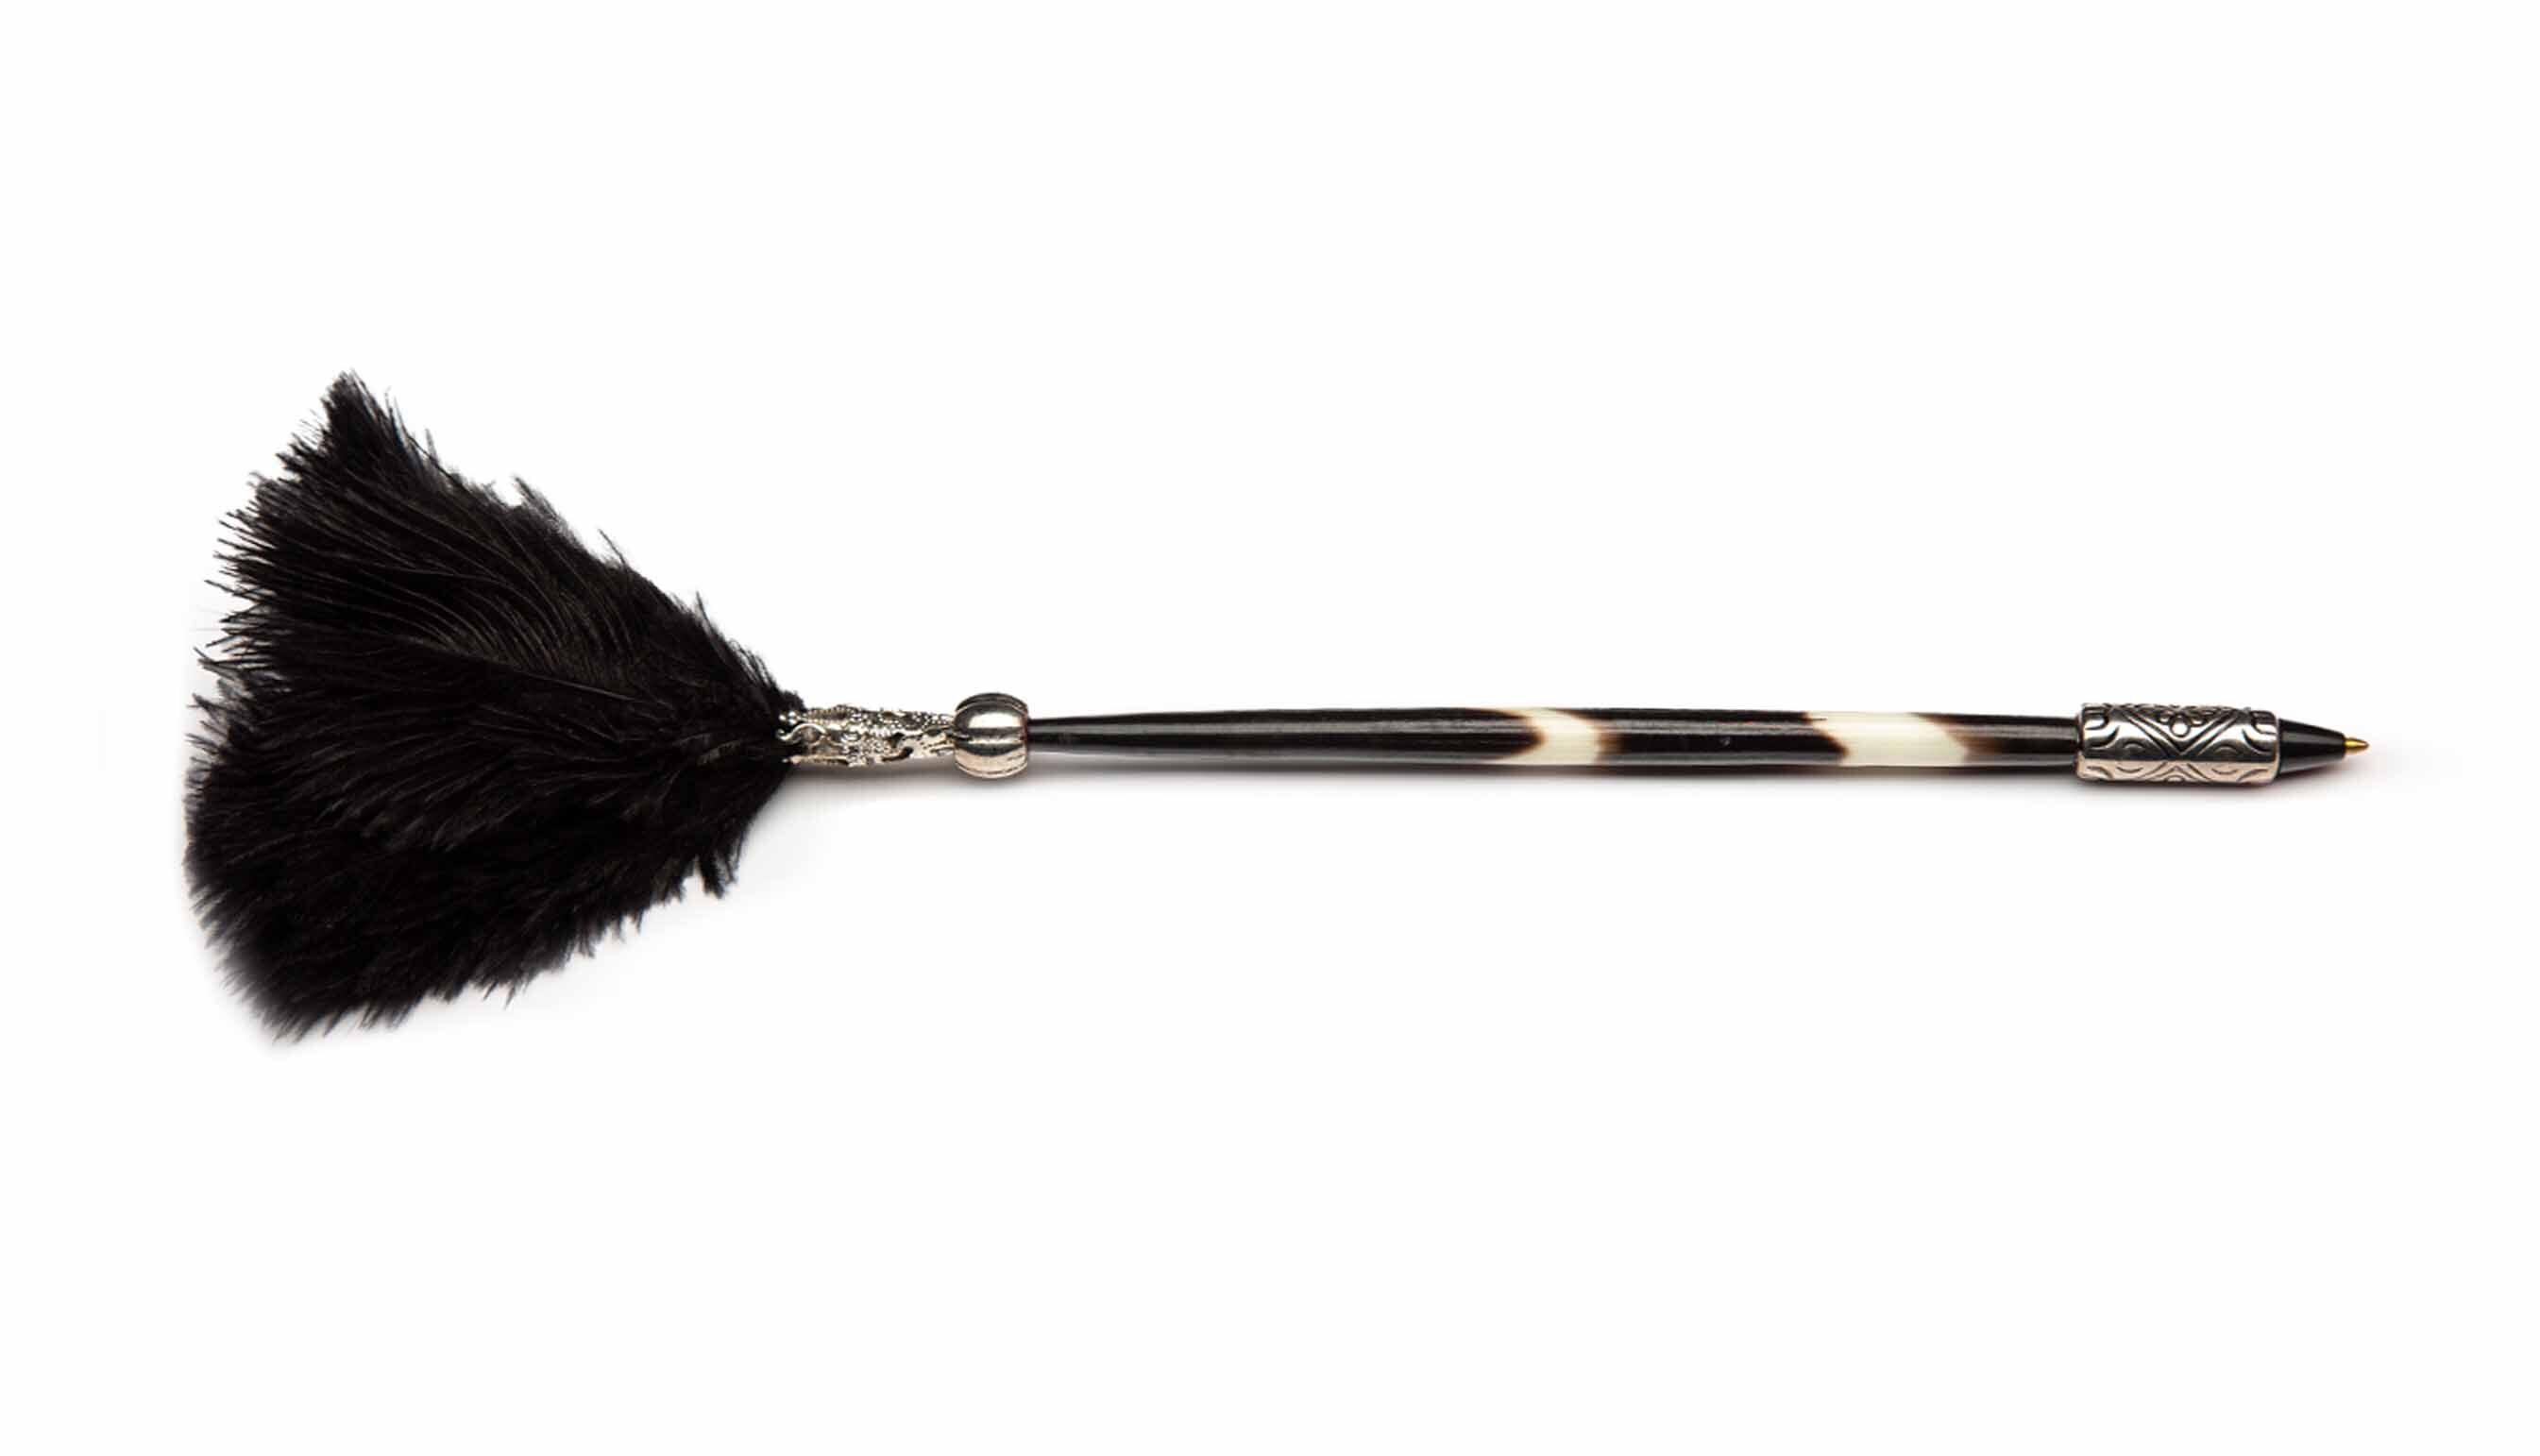 Porcupine Quill Pen W/ Black Feathers